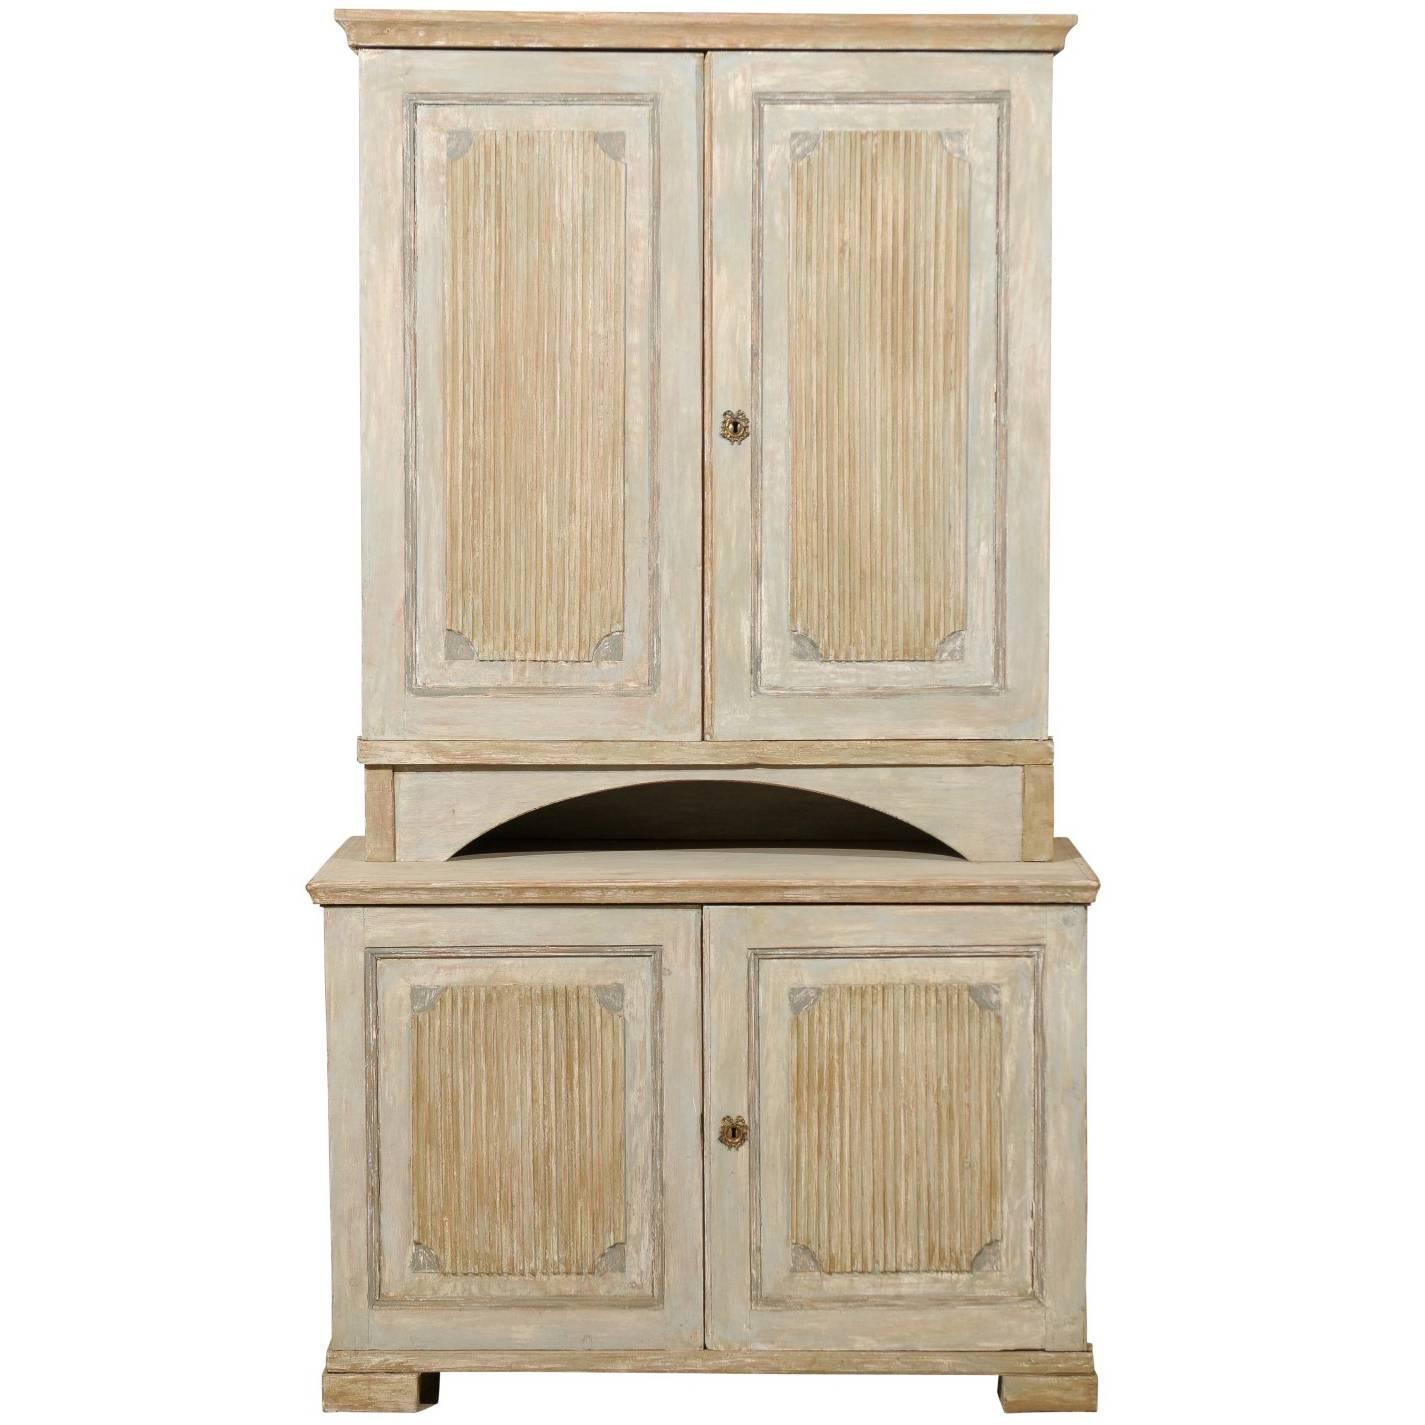 Period Gustavian Swedish Cabinet from 19th Century with Many Interior Shelves